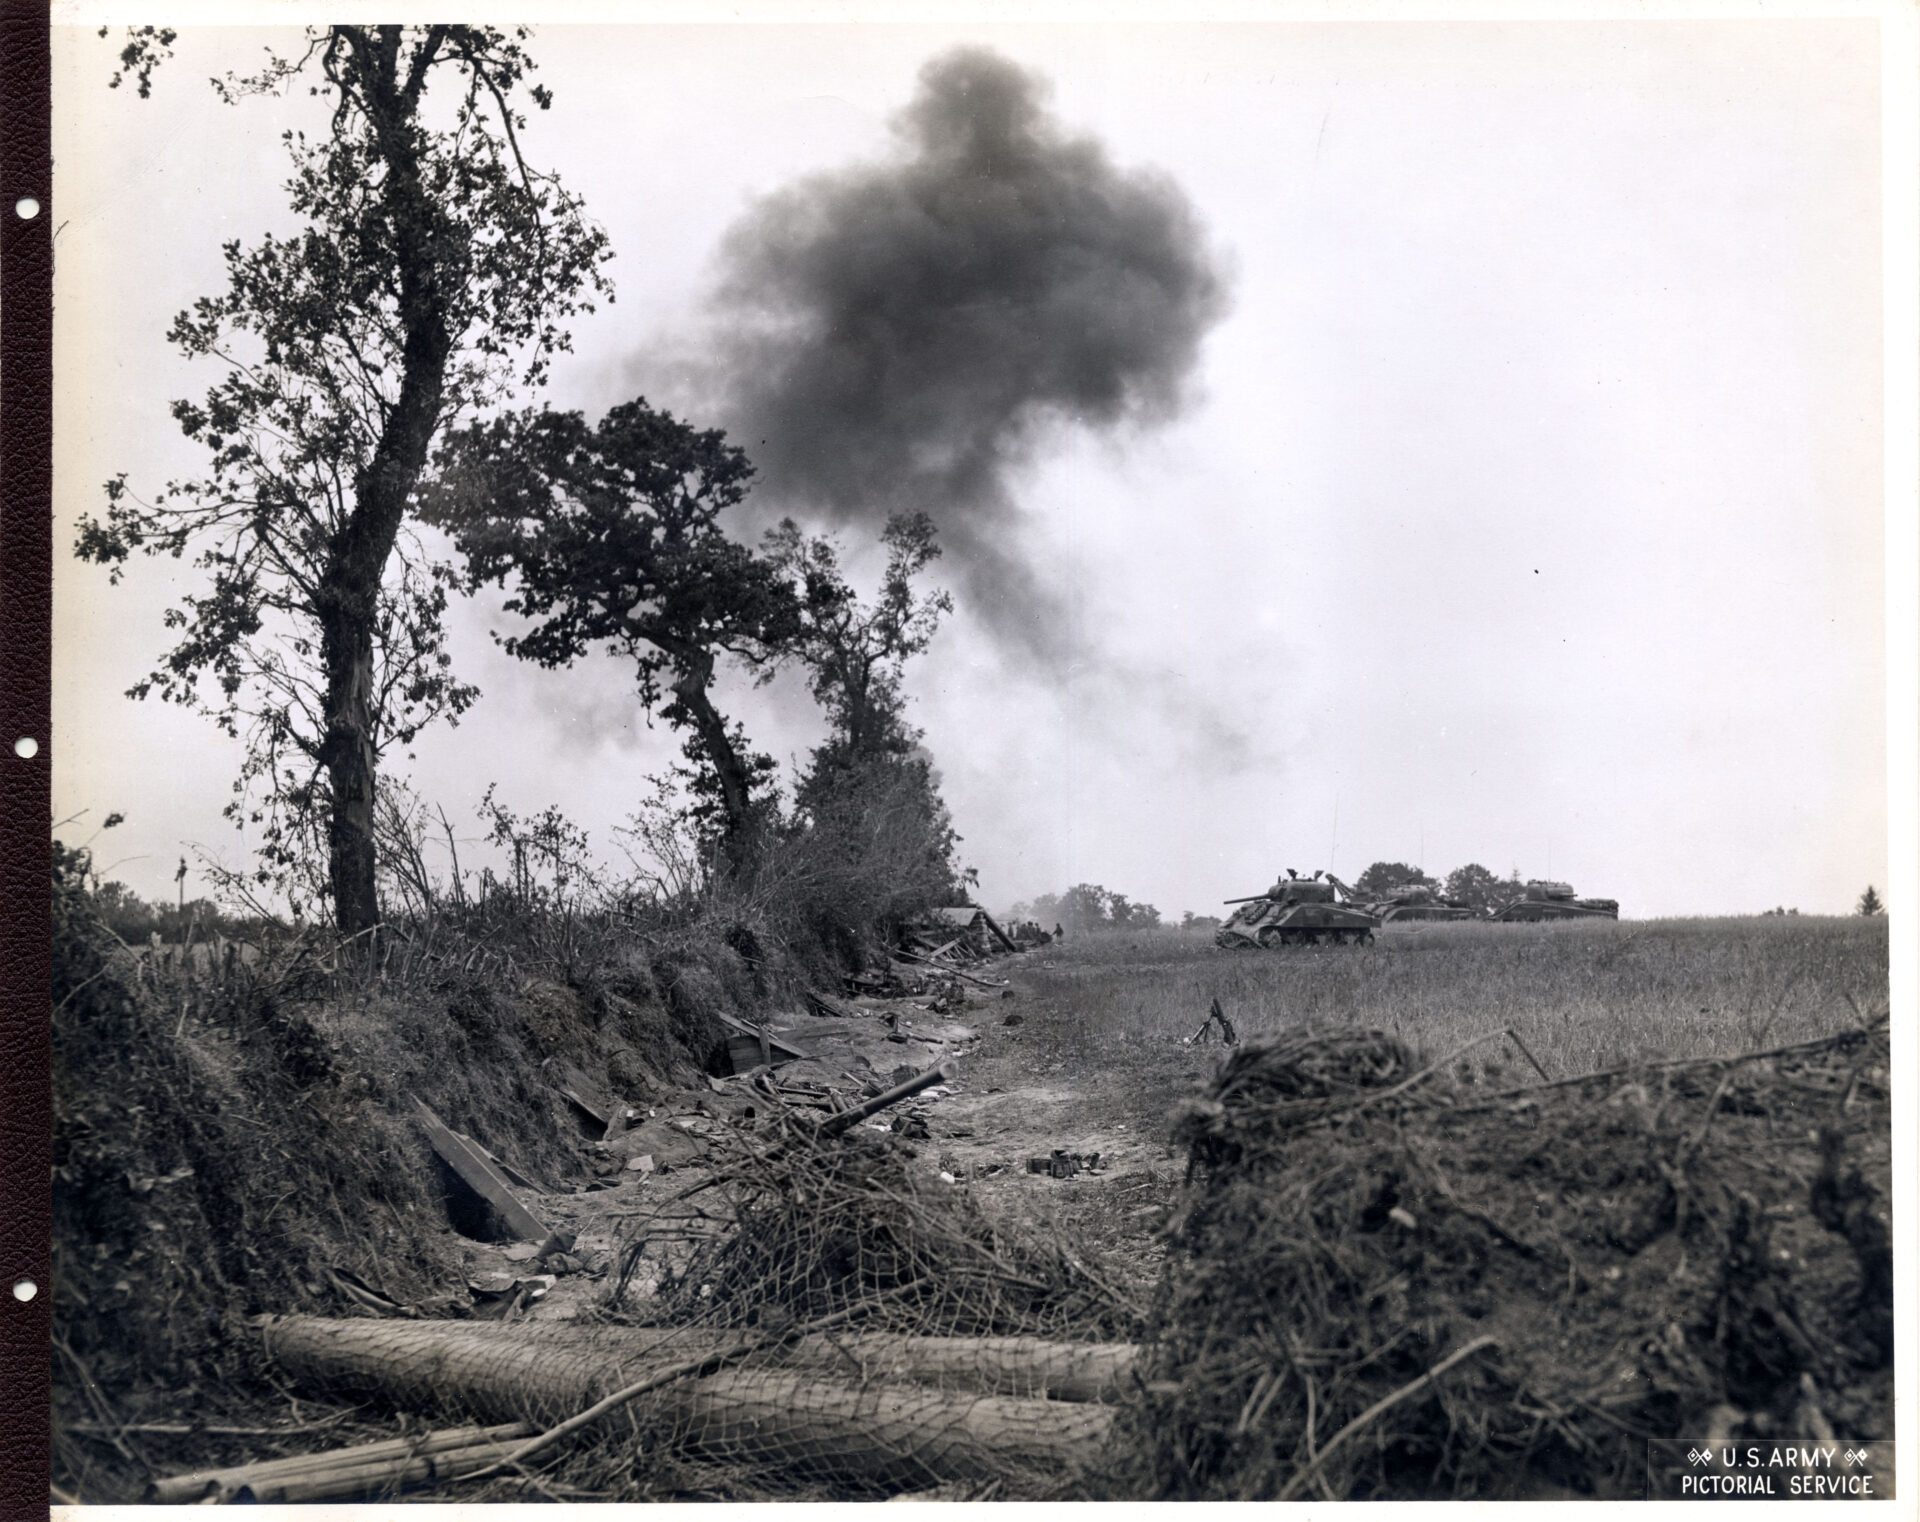 Mine explosion in a field during a battle